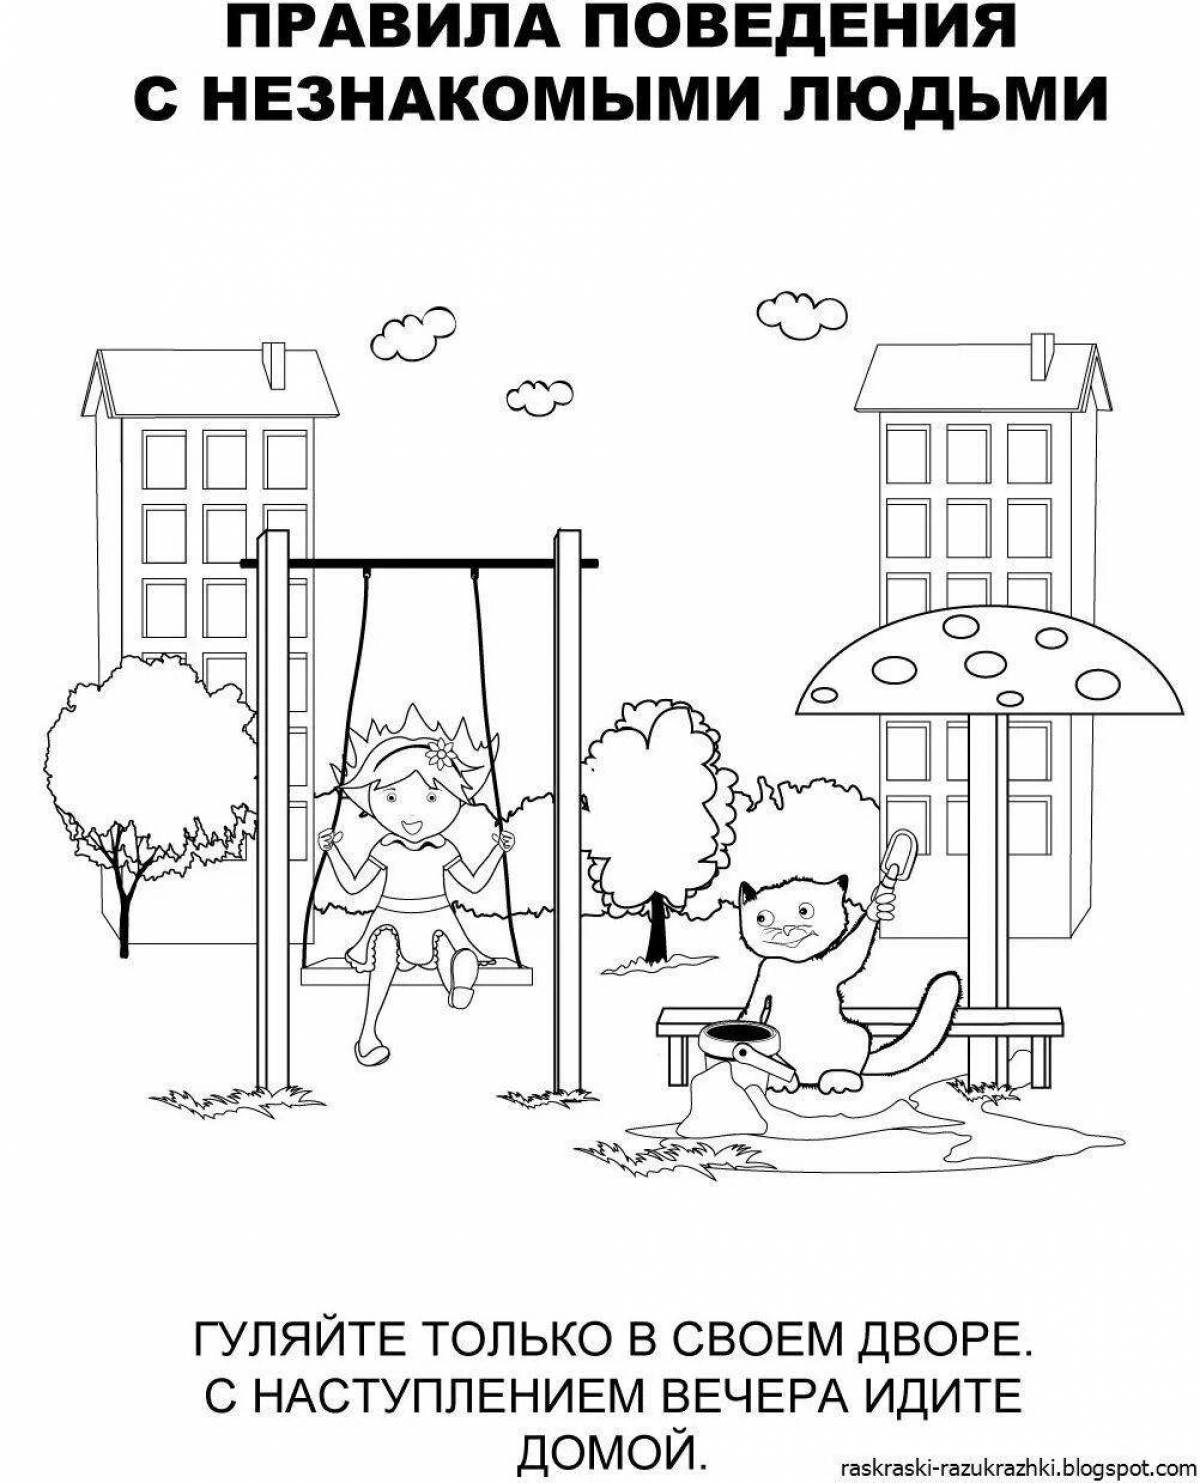 Colorful home safety coloring page